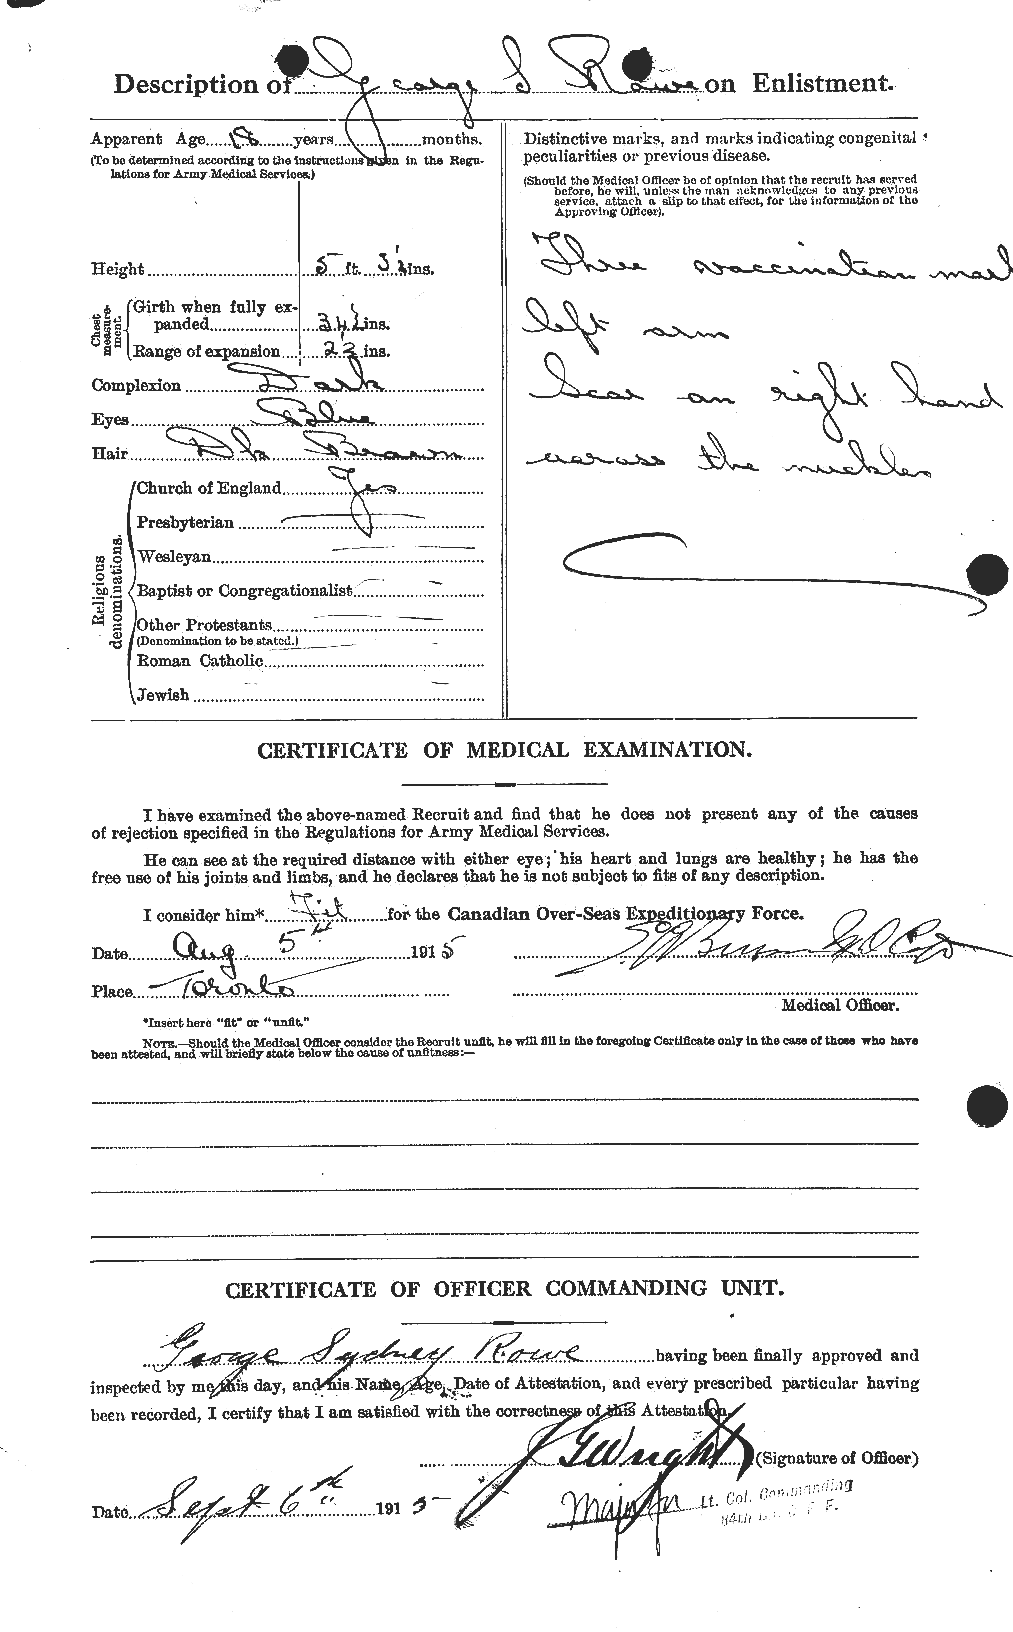 Personnel Records of the First World War - CEF 615885b